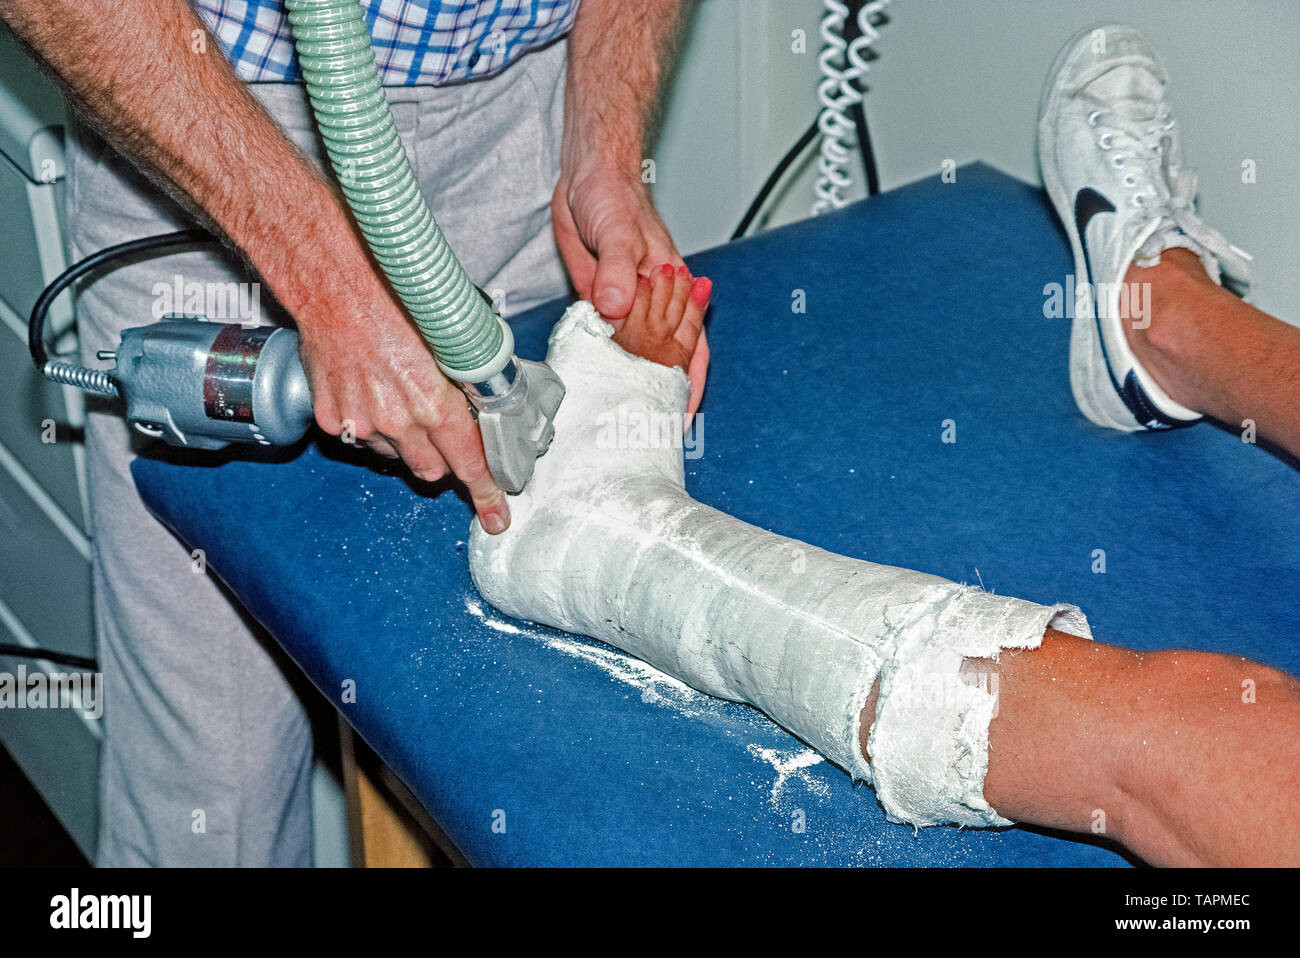 A special electric-powered saw is used by an orthopedic physician to make perforations in the plaster cast that supported the broken ankle of a Caucasian woman while the fractured bone in her left leg was healing. The blade of this oscillating cast saw vibrates instead of spinning, which prevents it from cutting the skin. After cuts have been made to the cast, it is pried apart so that the plaster and inside cotton lining can easily be removed from the injured appendage. The oscillating saw was patented for medical use in 1945 by an American orthopaedic surgeon, Dr. Homer Stryker. Stock Photo